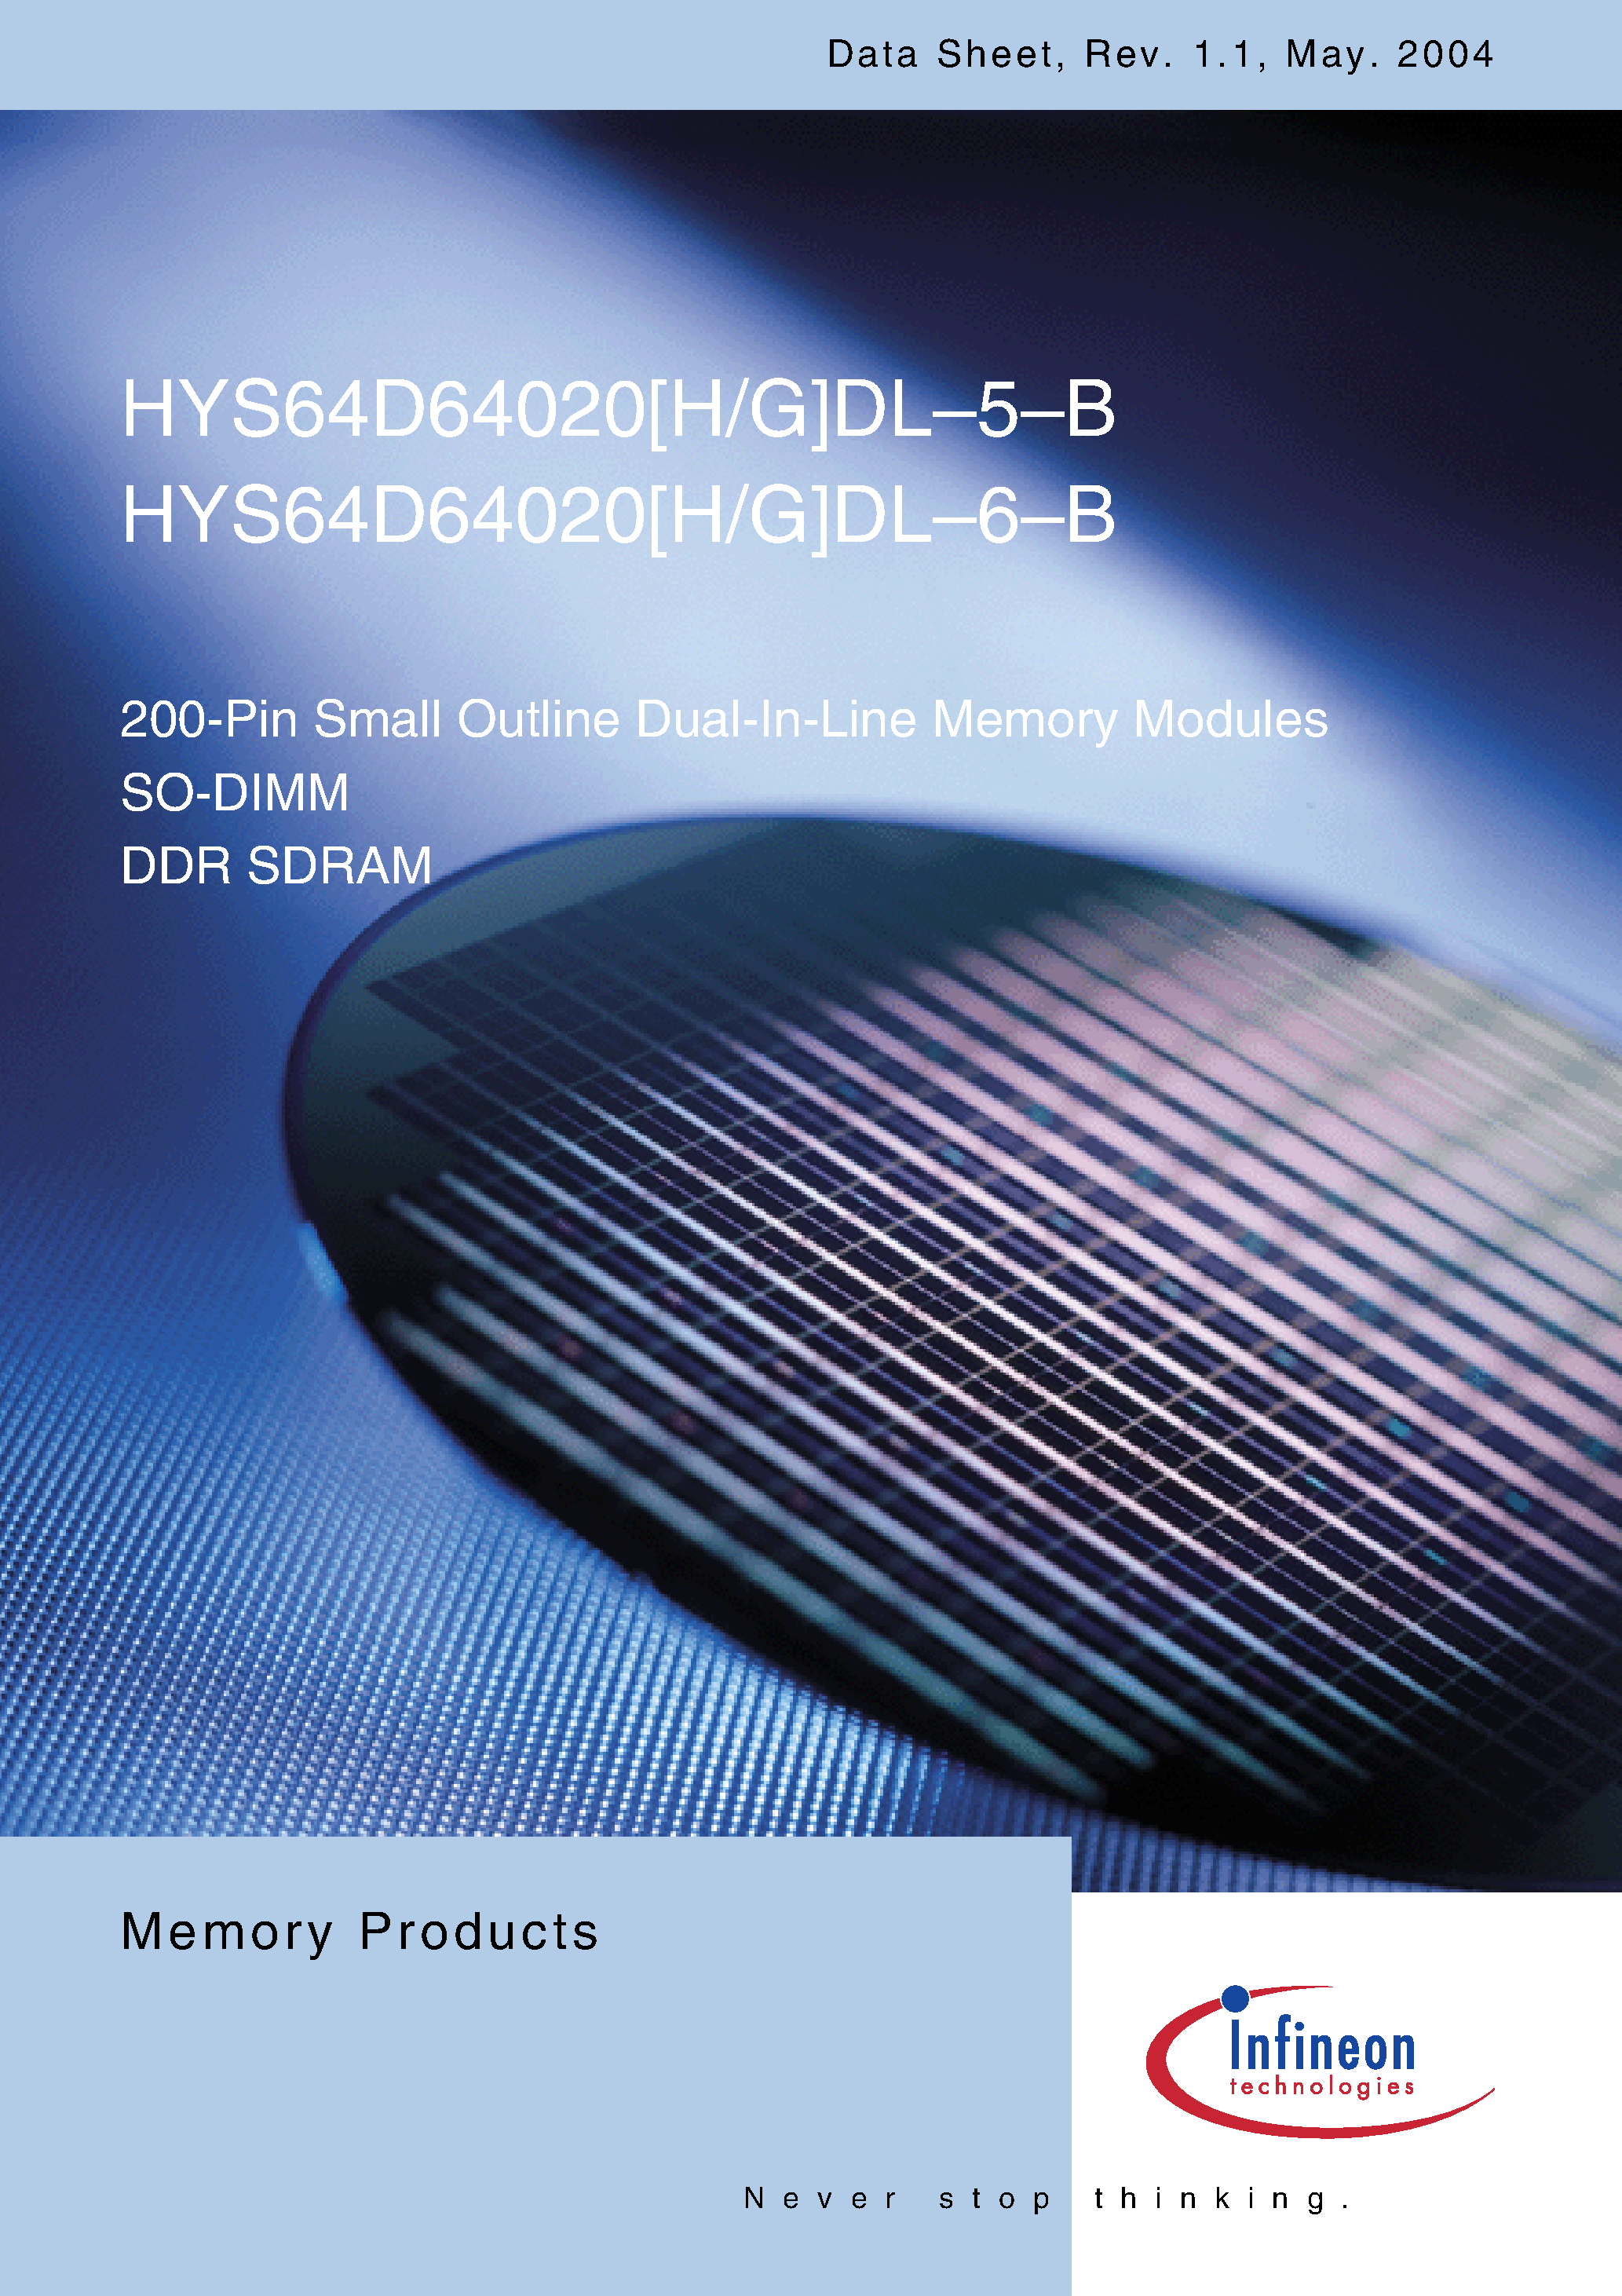 Даташит HYS64D64020GDL-6-B - 200-Pin Small Outline Dual-In-Line Memory Modules страница 1